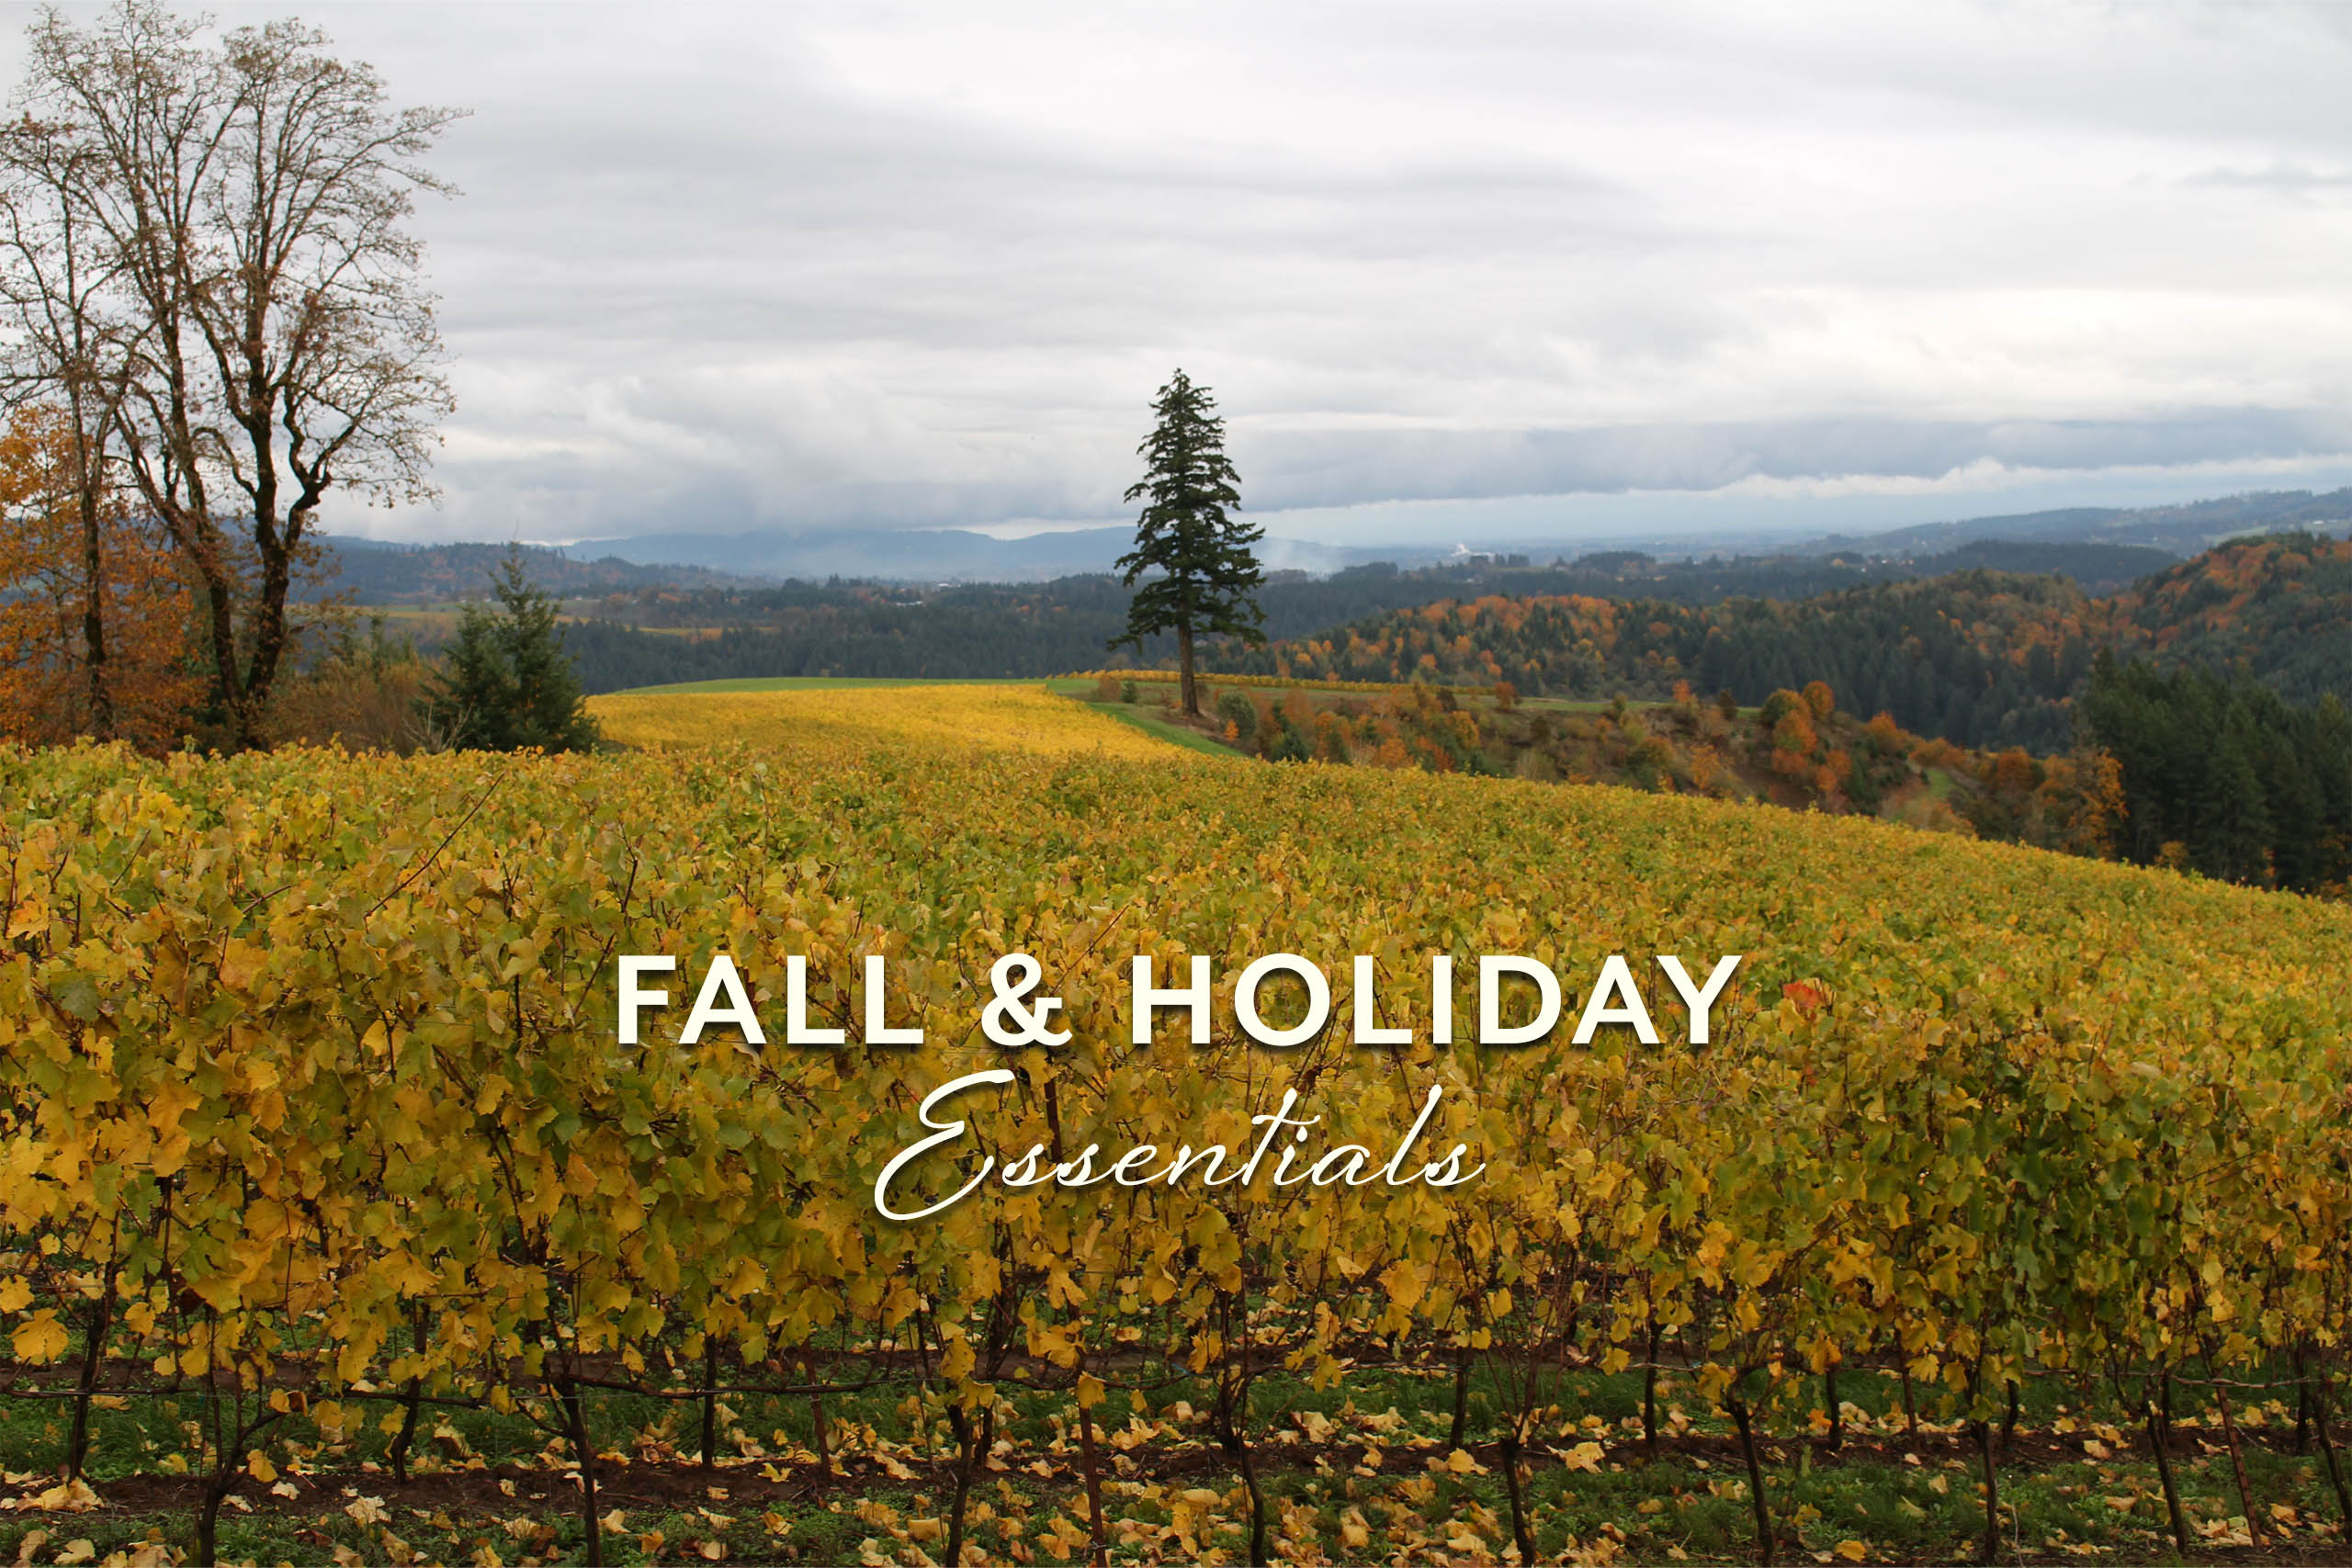 A view of golden vines and Autumn trees at Fairsing Vineyard in Oregon's Willamette Valley